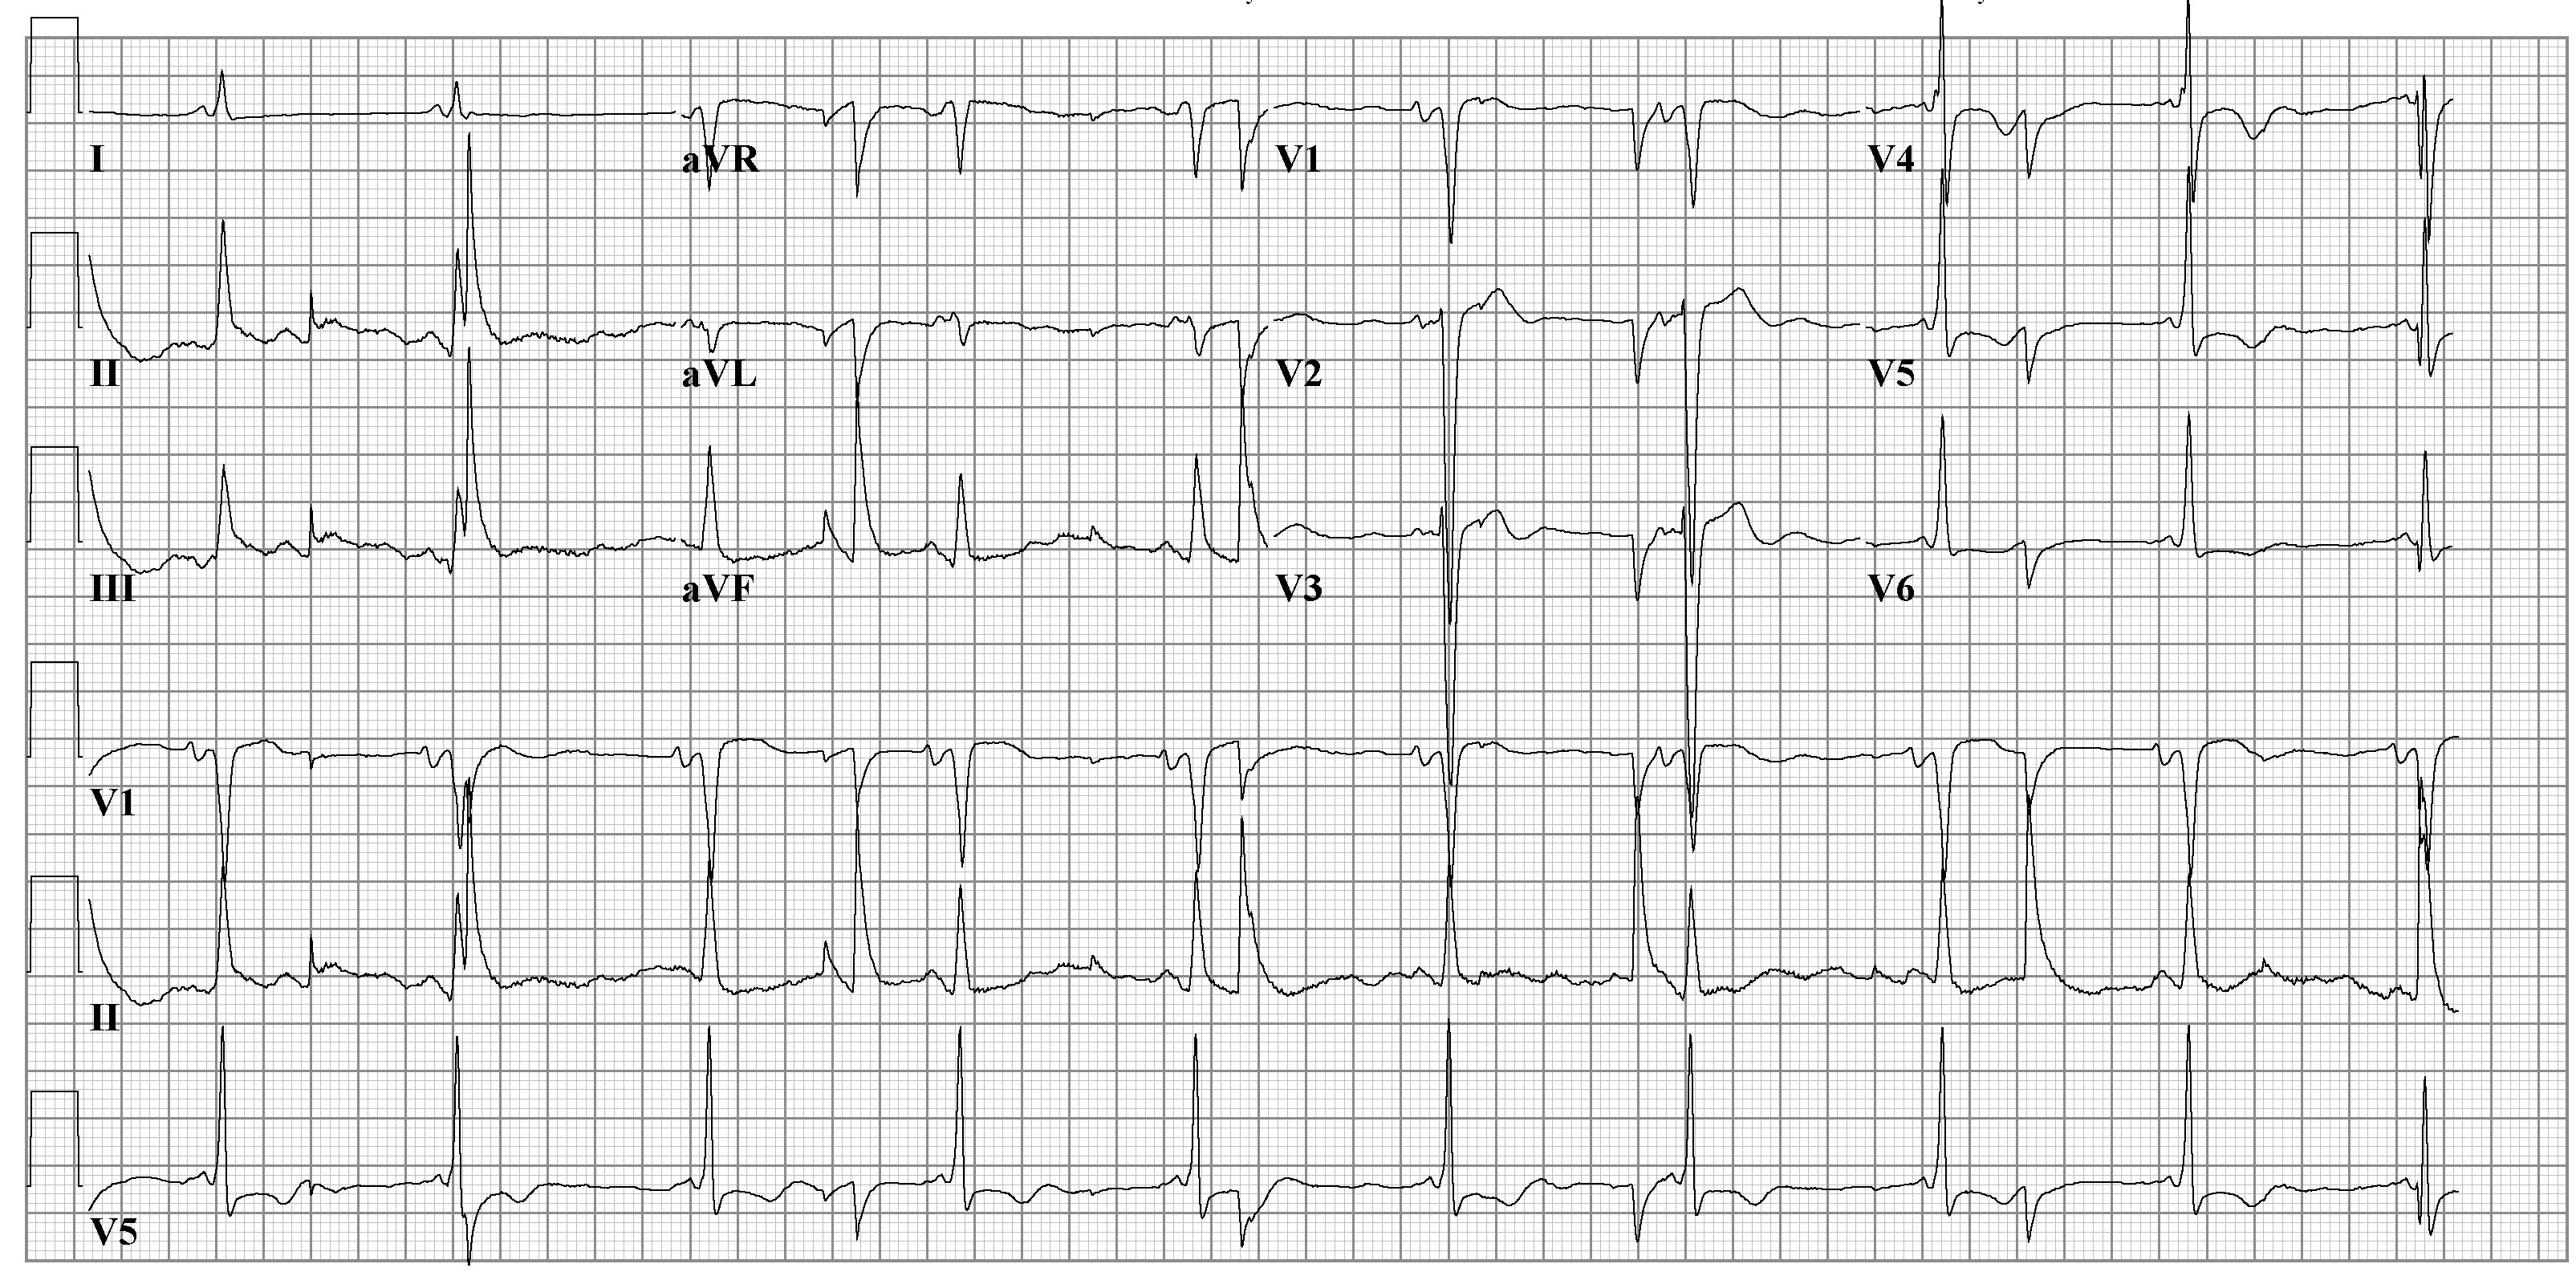 Another example of an artifact caused by an electrical appliance. The patients rhythm is regular. This strip shows 10 QRS complexes.